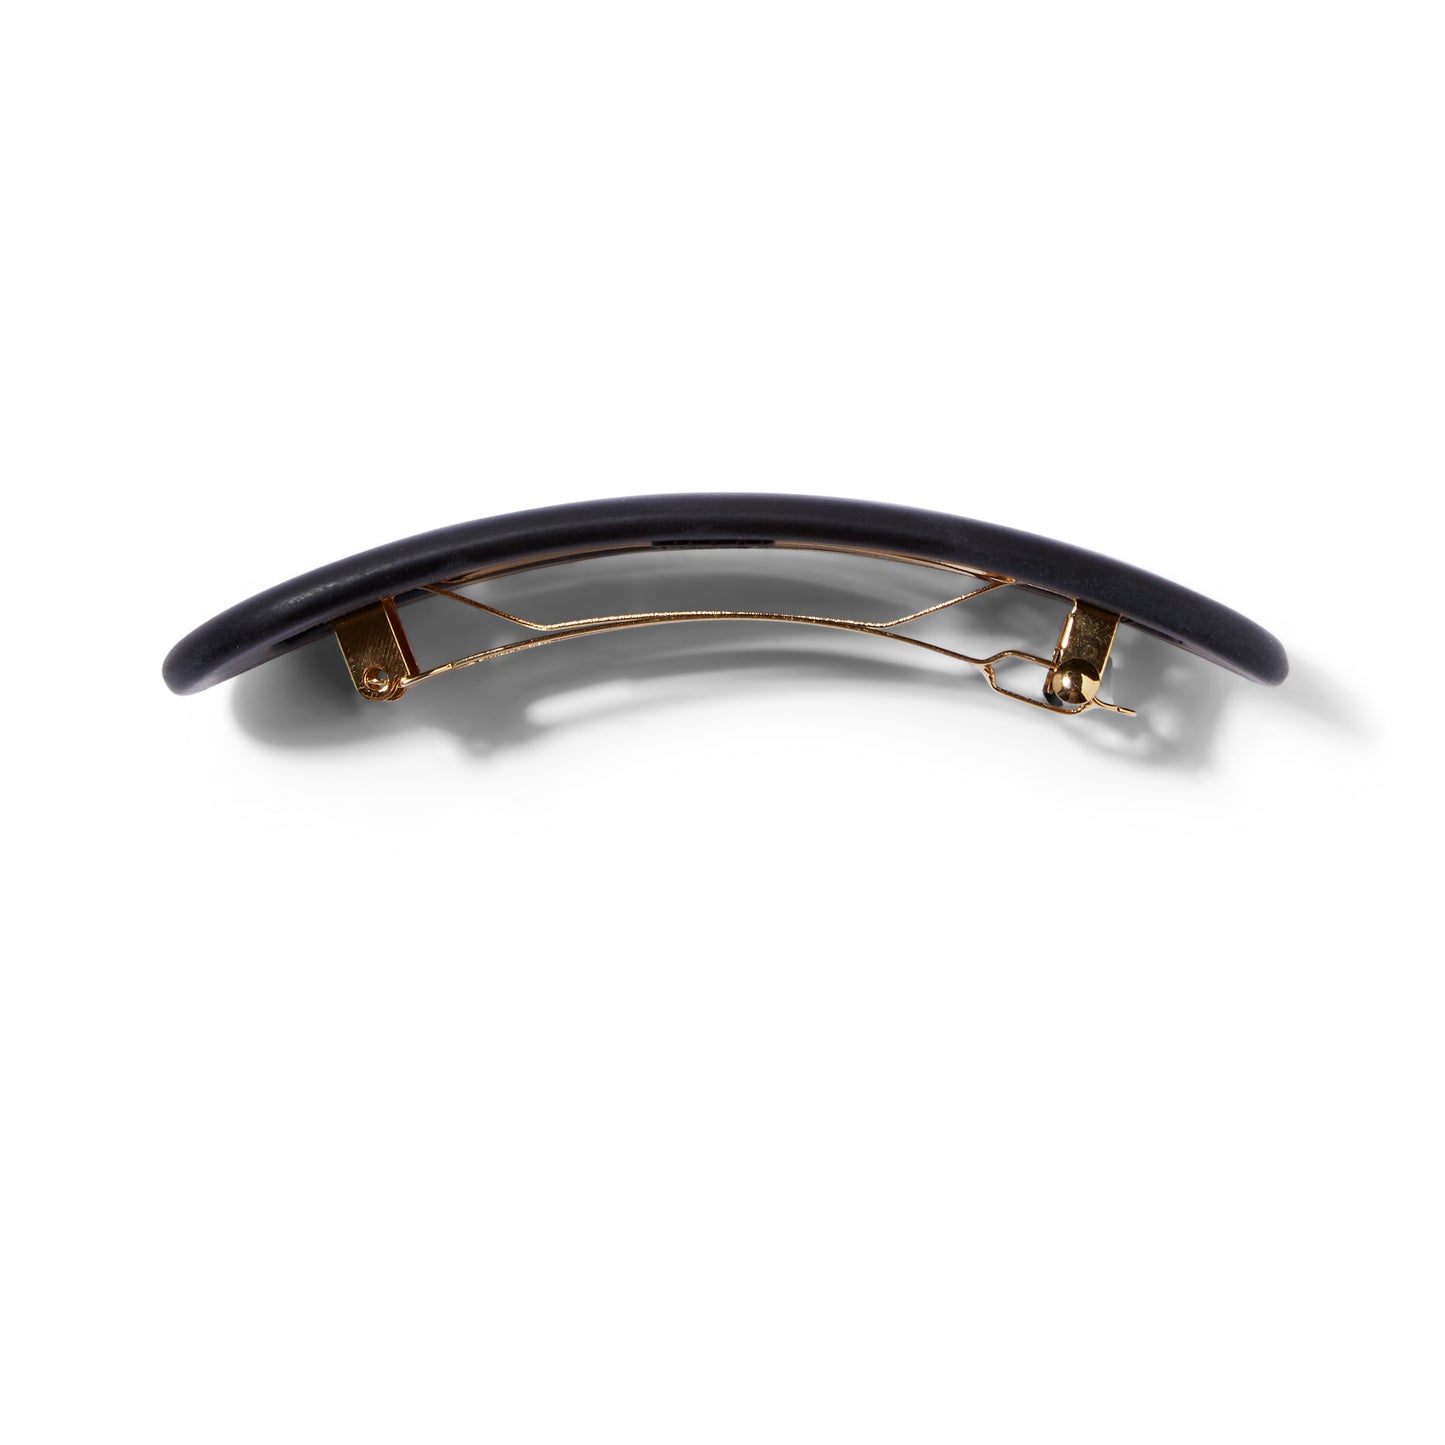 An side view of the matte black UNDO oval shaped hair clip that shows the gold hardware. 